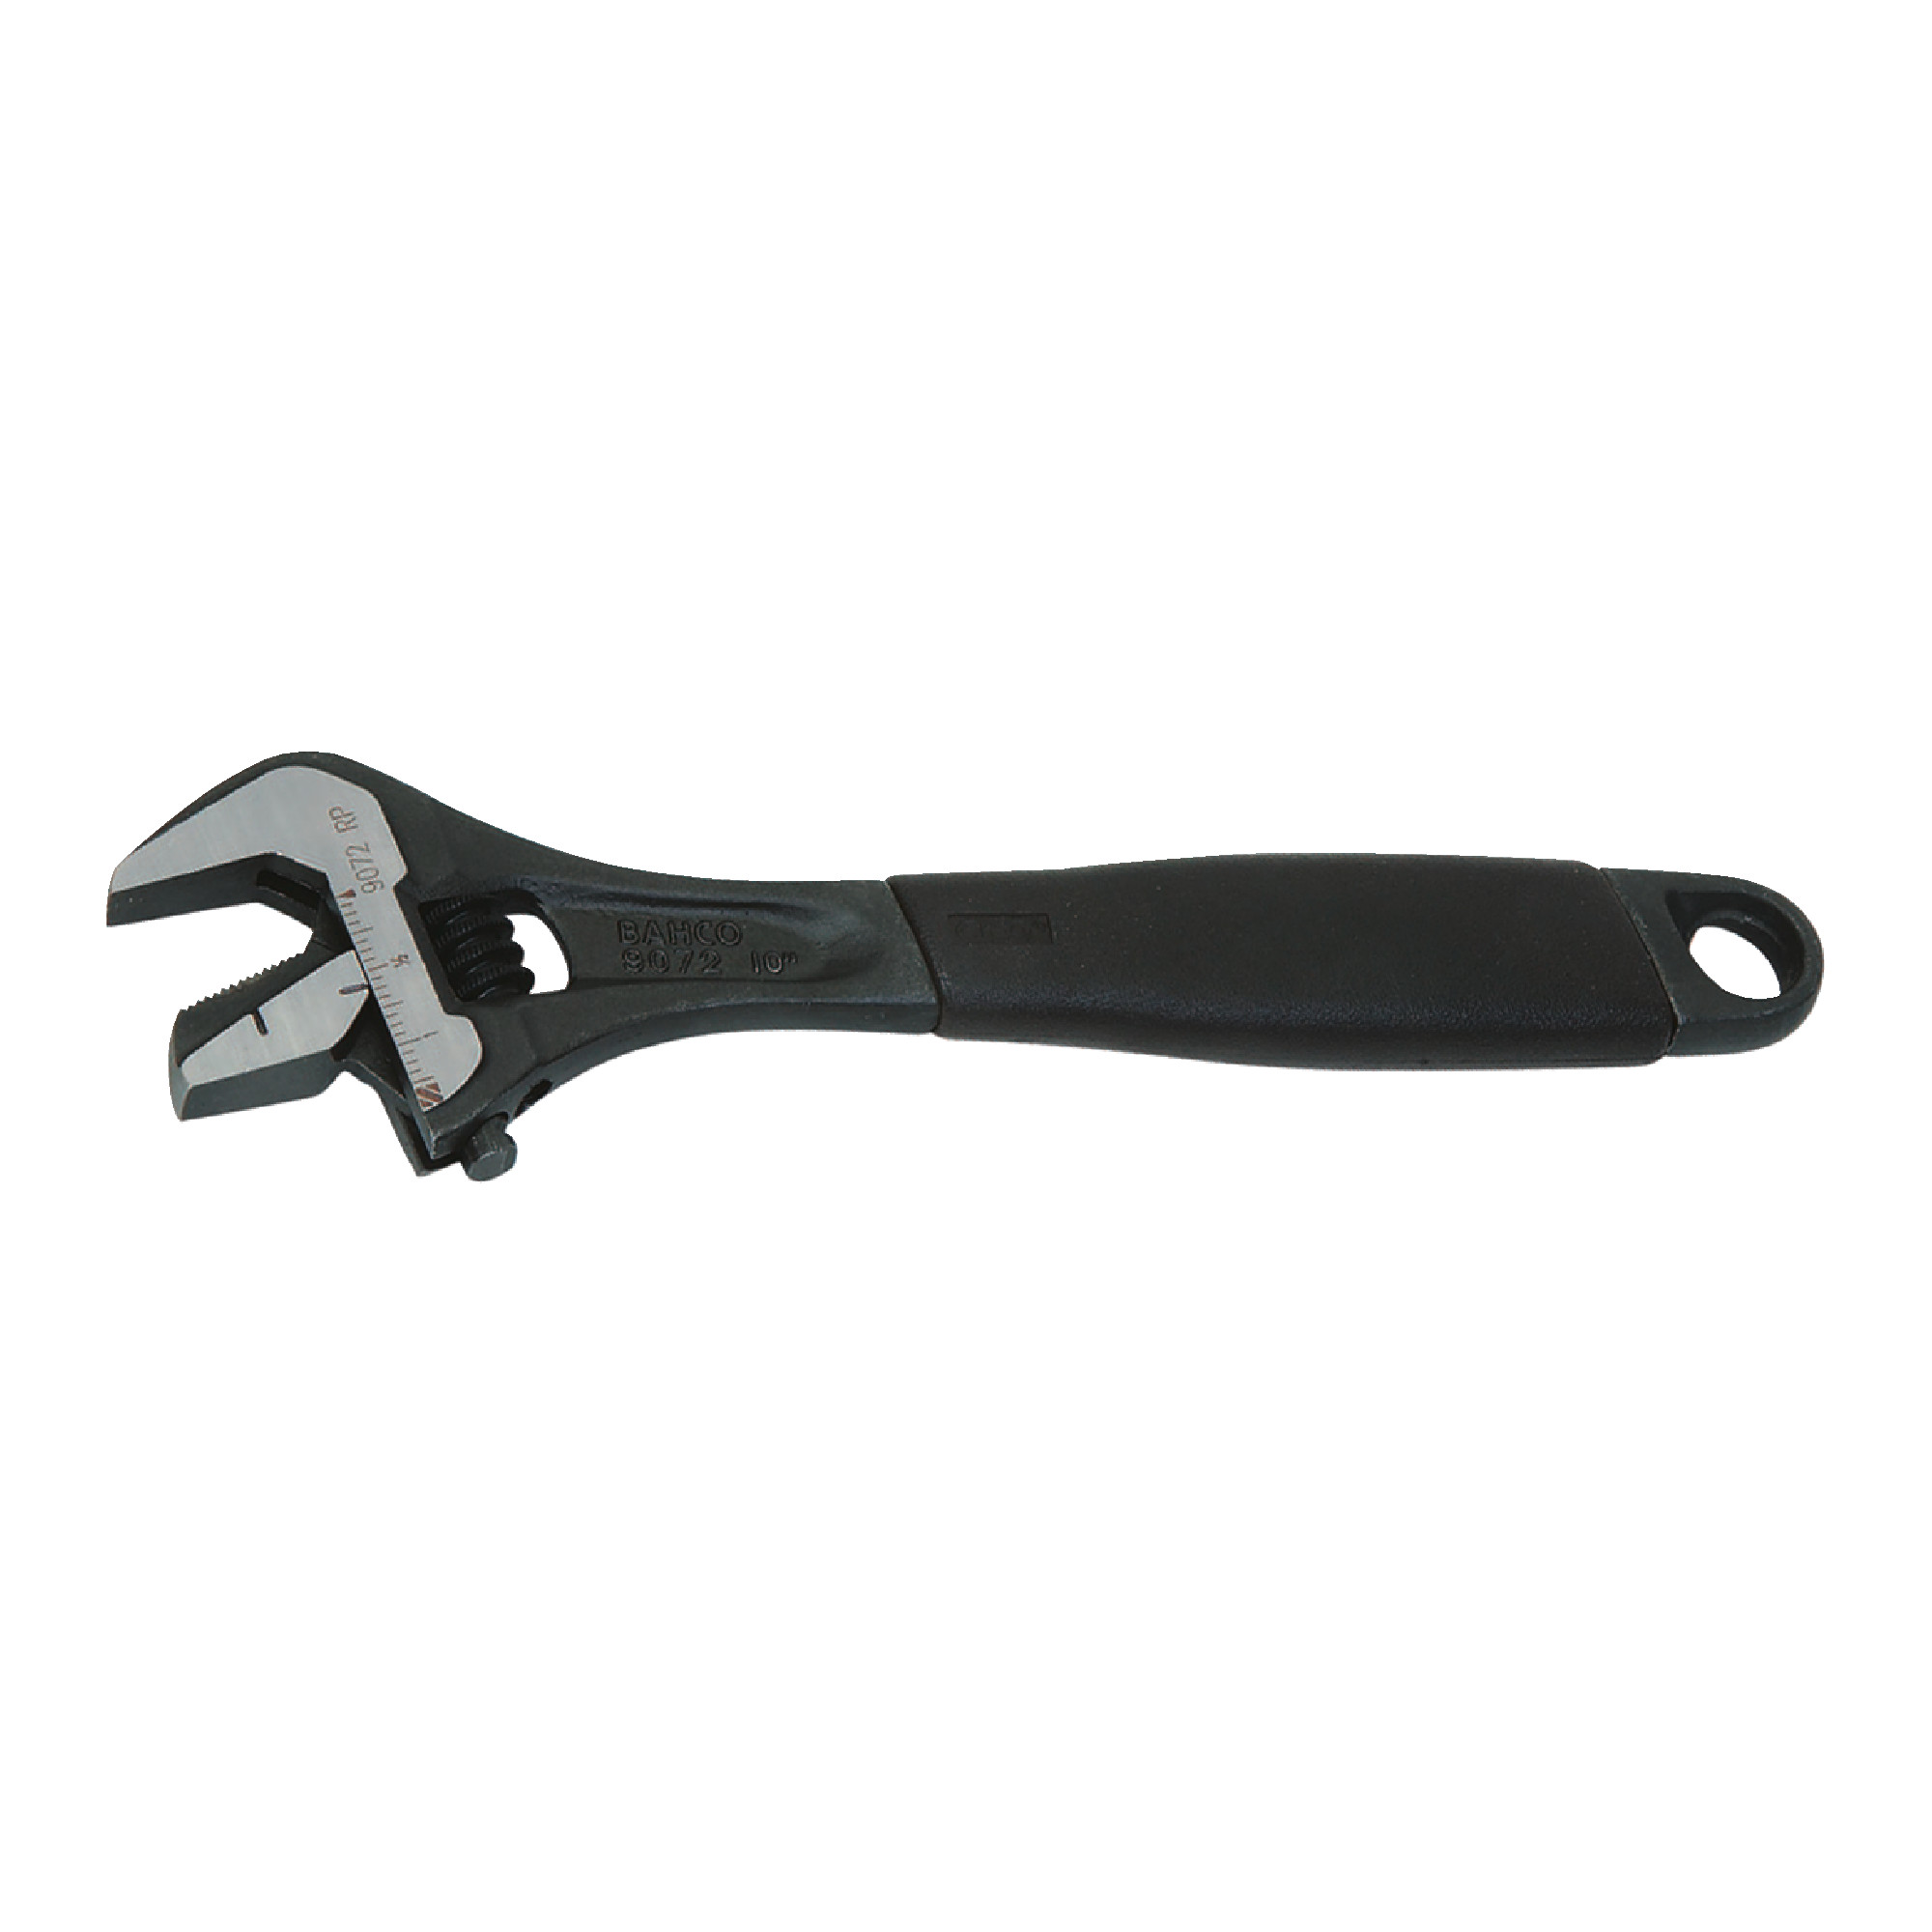 9072 R US 1-3/16" Adjustable Wrench With Black Phosphate Finish Finish